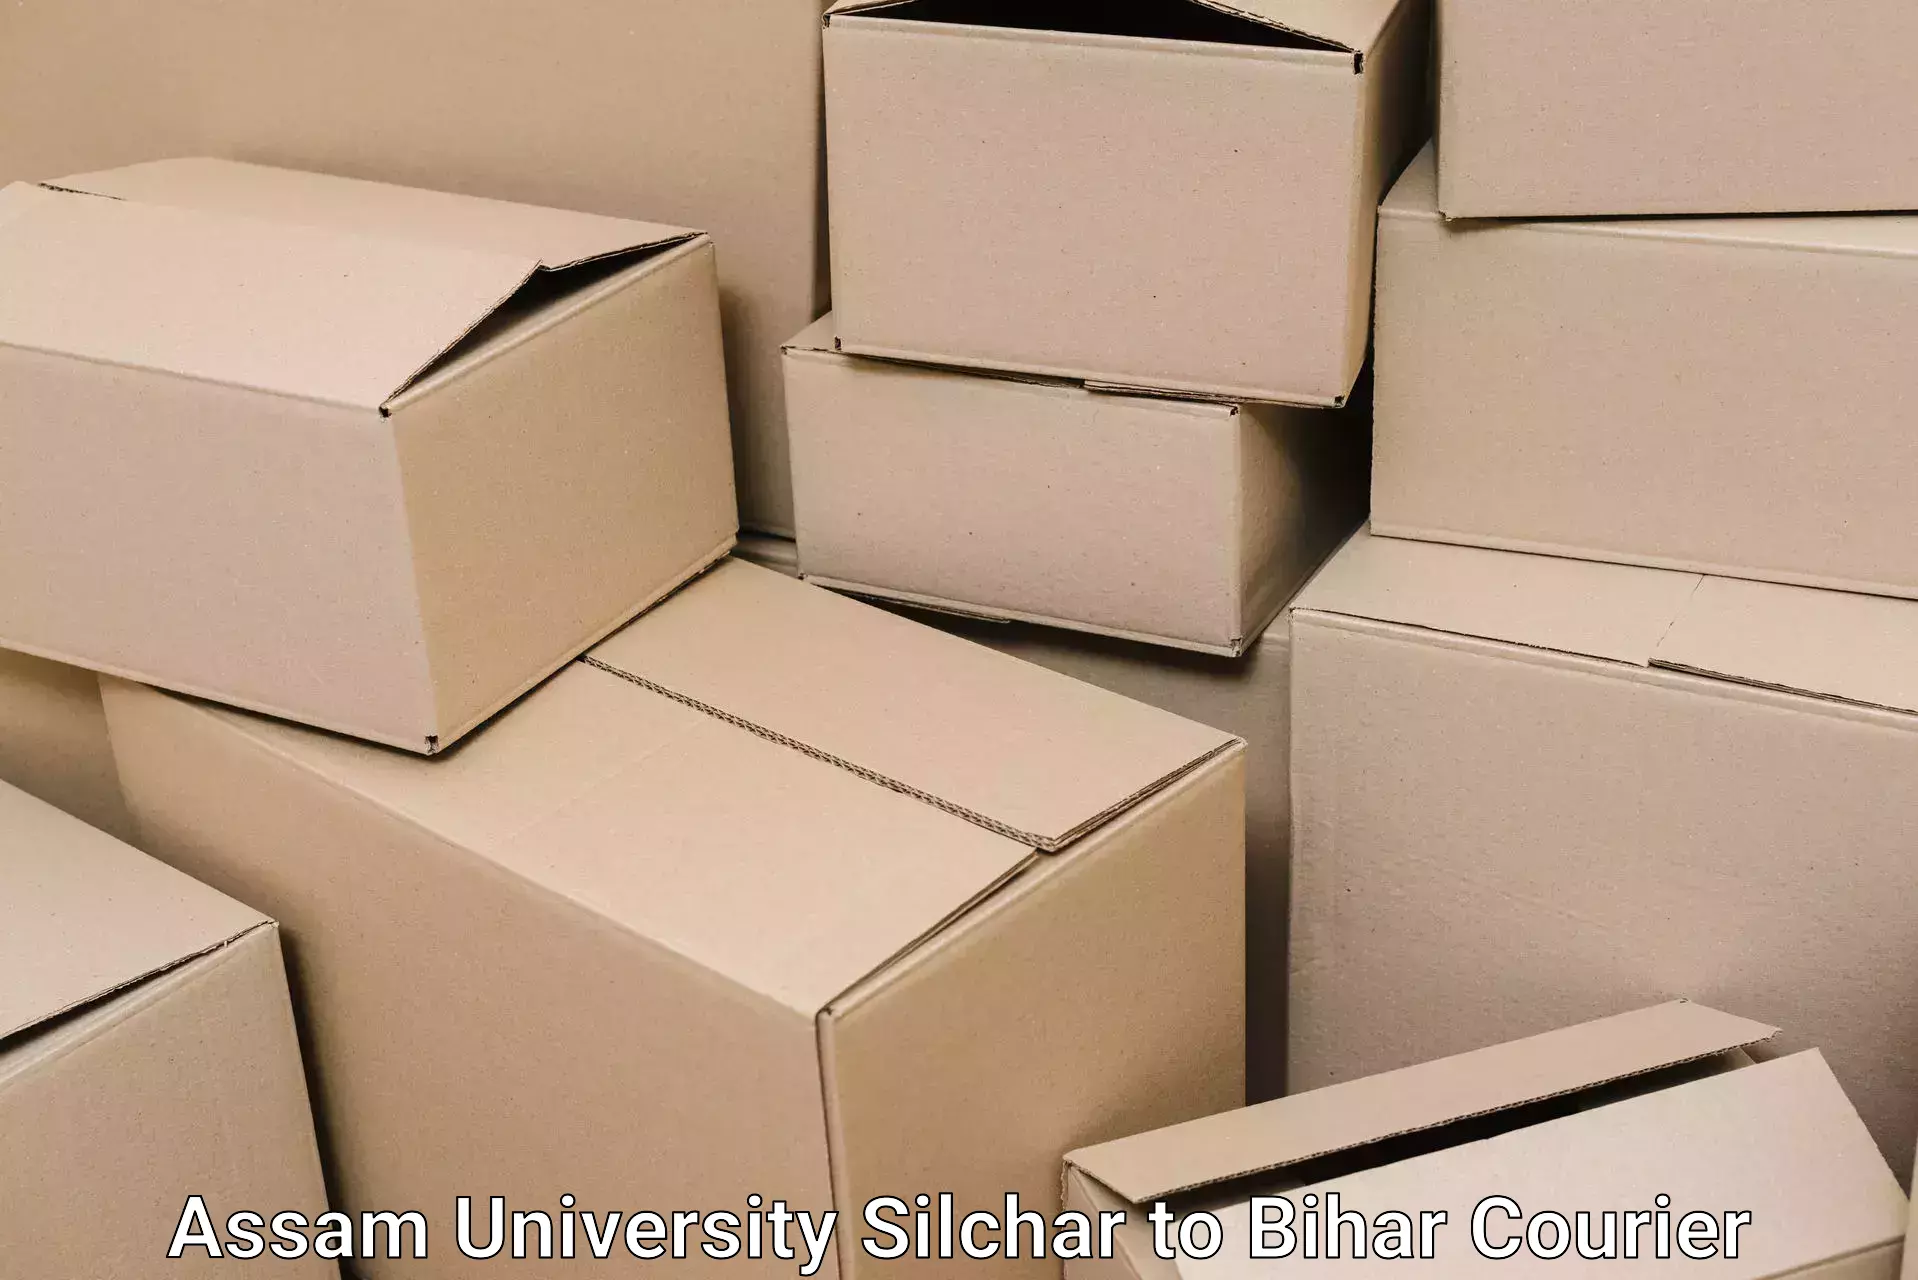 Quality moving and storage Assam University Silchar to Bihar